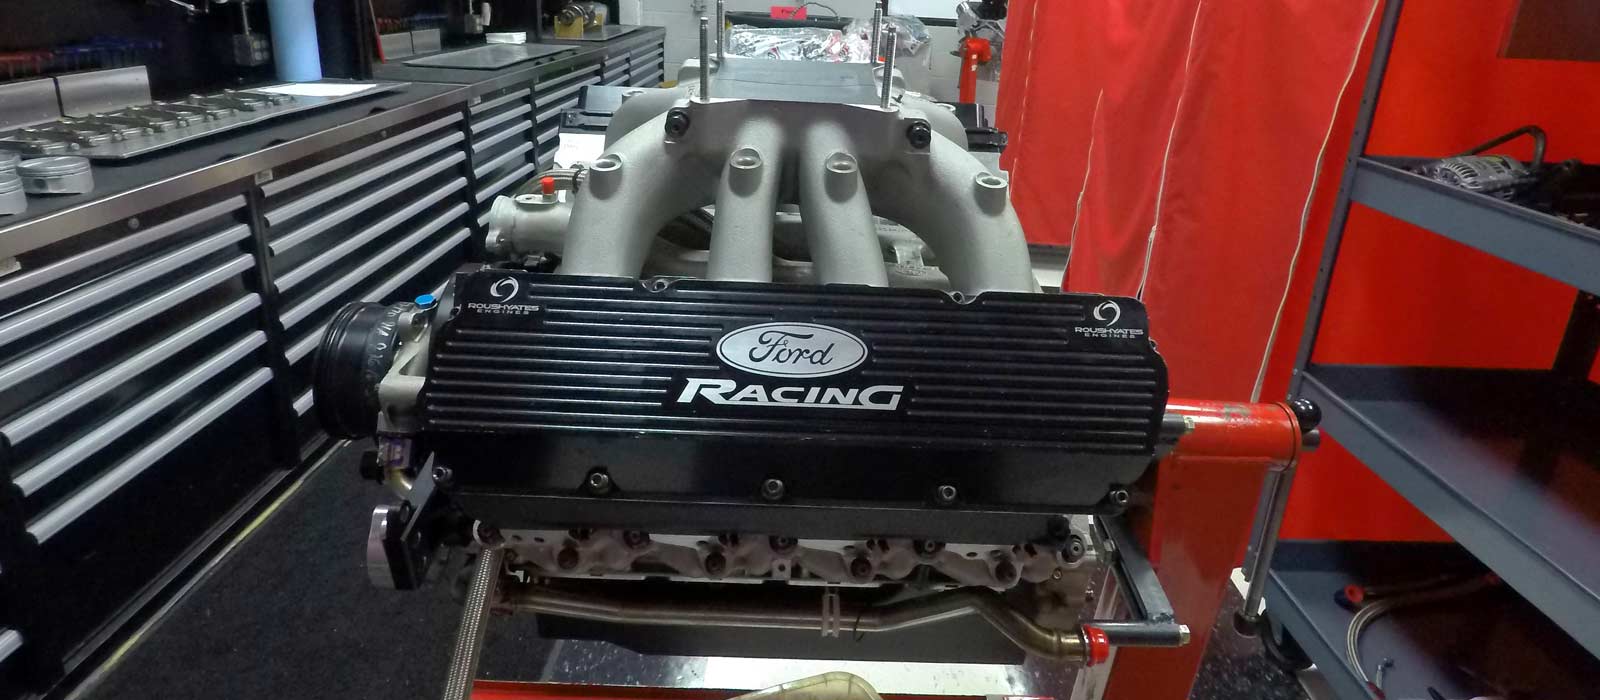 An image of a FR9 NASCAR Engine from Roush Yates Engines at NASCAR Tech in Mooresville, North Carolina